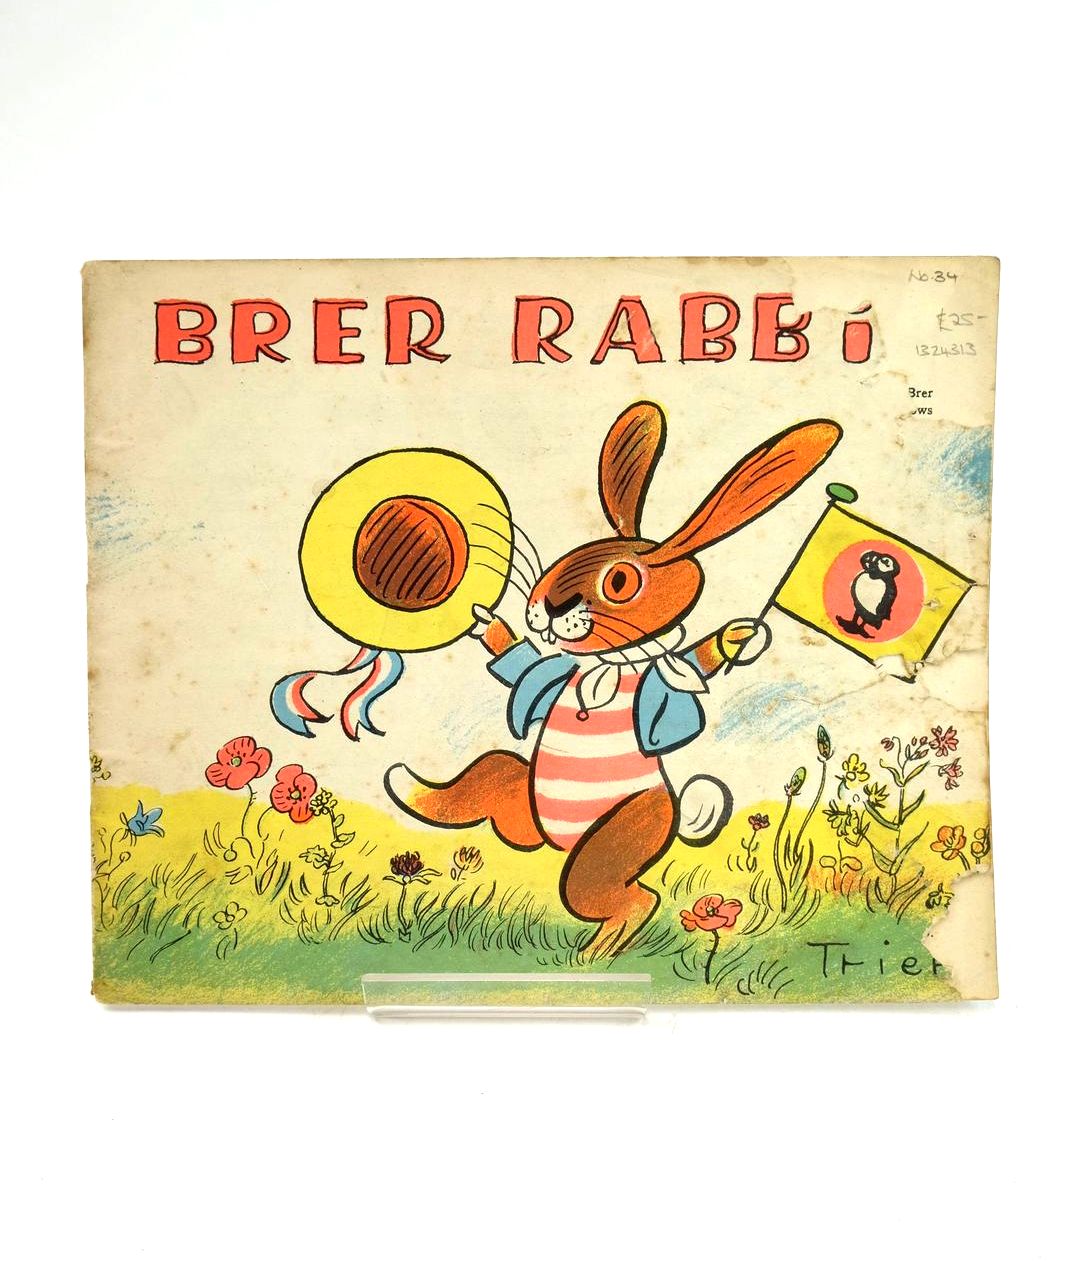 Photo of BRER RABBIT written by Harris, Joel Chandler illustrated by Trier, Walter published by Penguin Books Ltd (STOCK CODE: 1324313)  for sale by Stella & Rose's Books